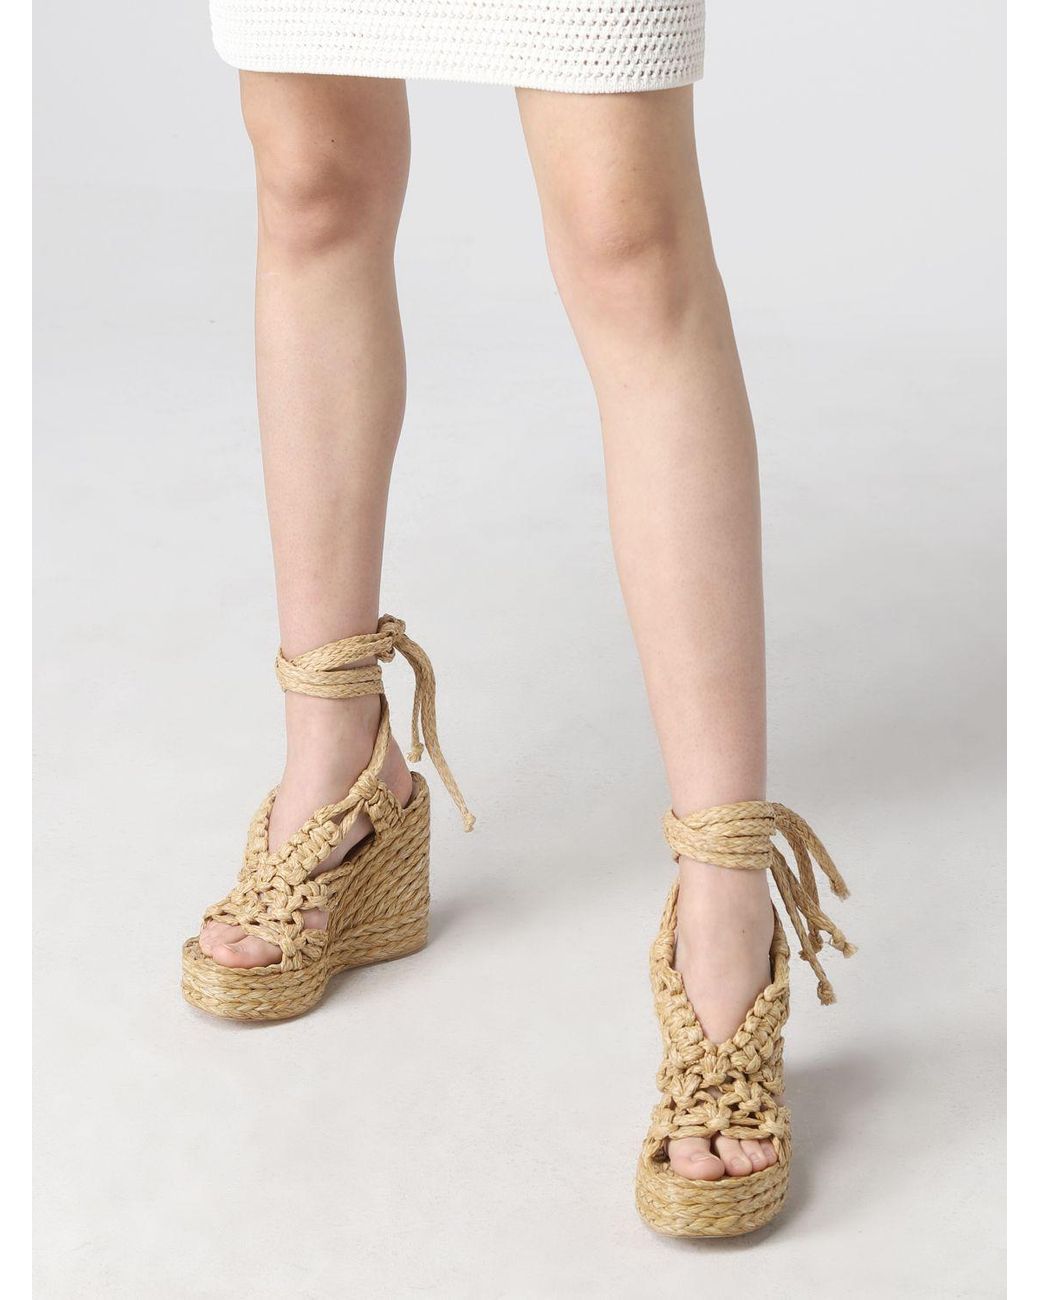 Paloma Barceló Camino Wedge Sandals In Raffia in Natural | Lyst